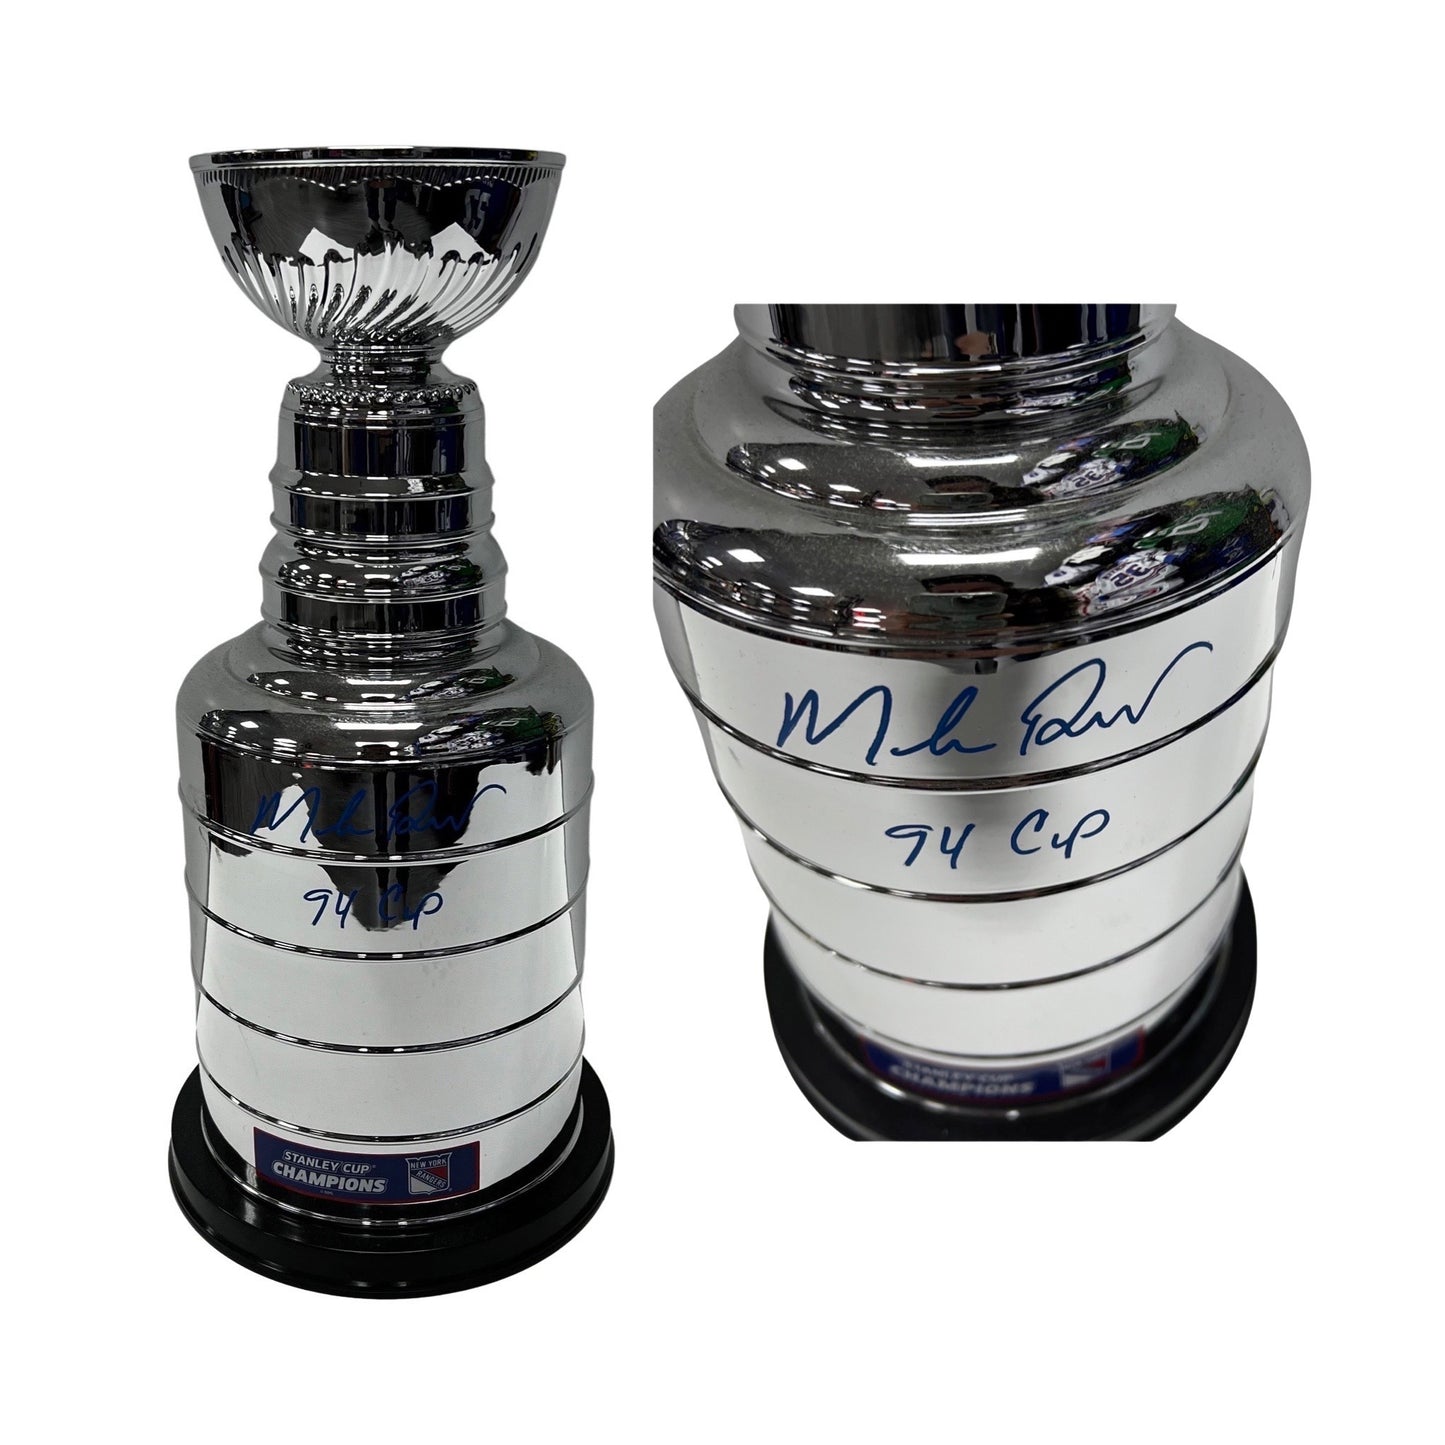 Mike Richter Autographed New York Rangers Replica Stanley Cup Trophy "94 Cup" Inscription Steiner CX